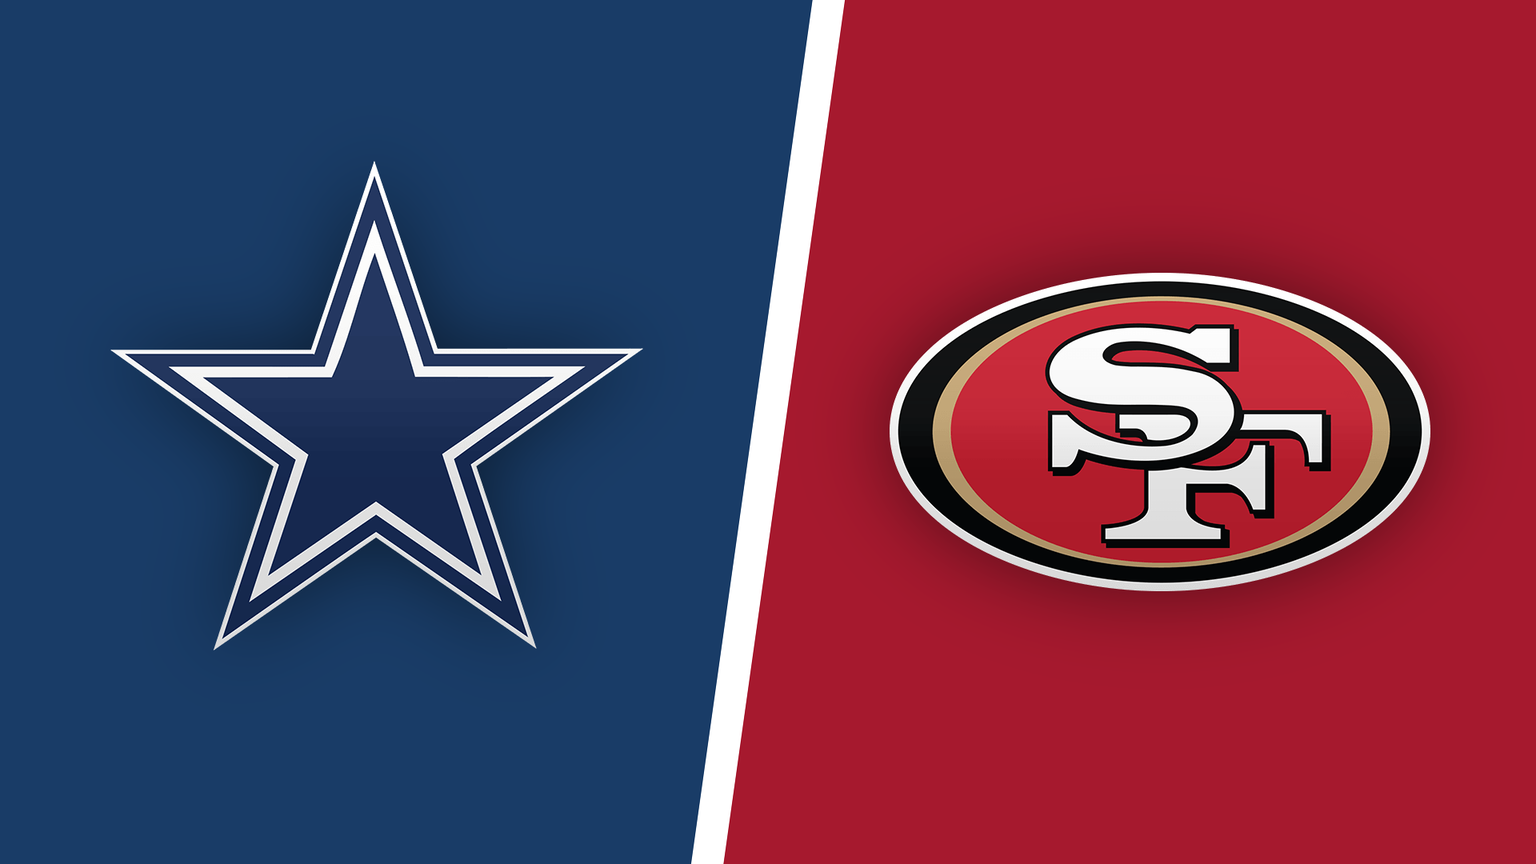 How to Watch Dallas Cowboys vs. San Francisco 49ers on CBS for Free on